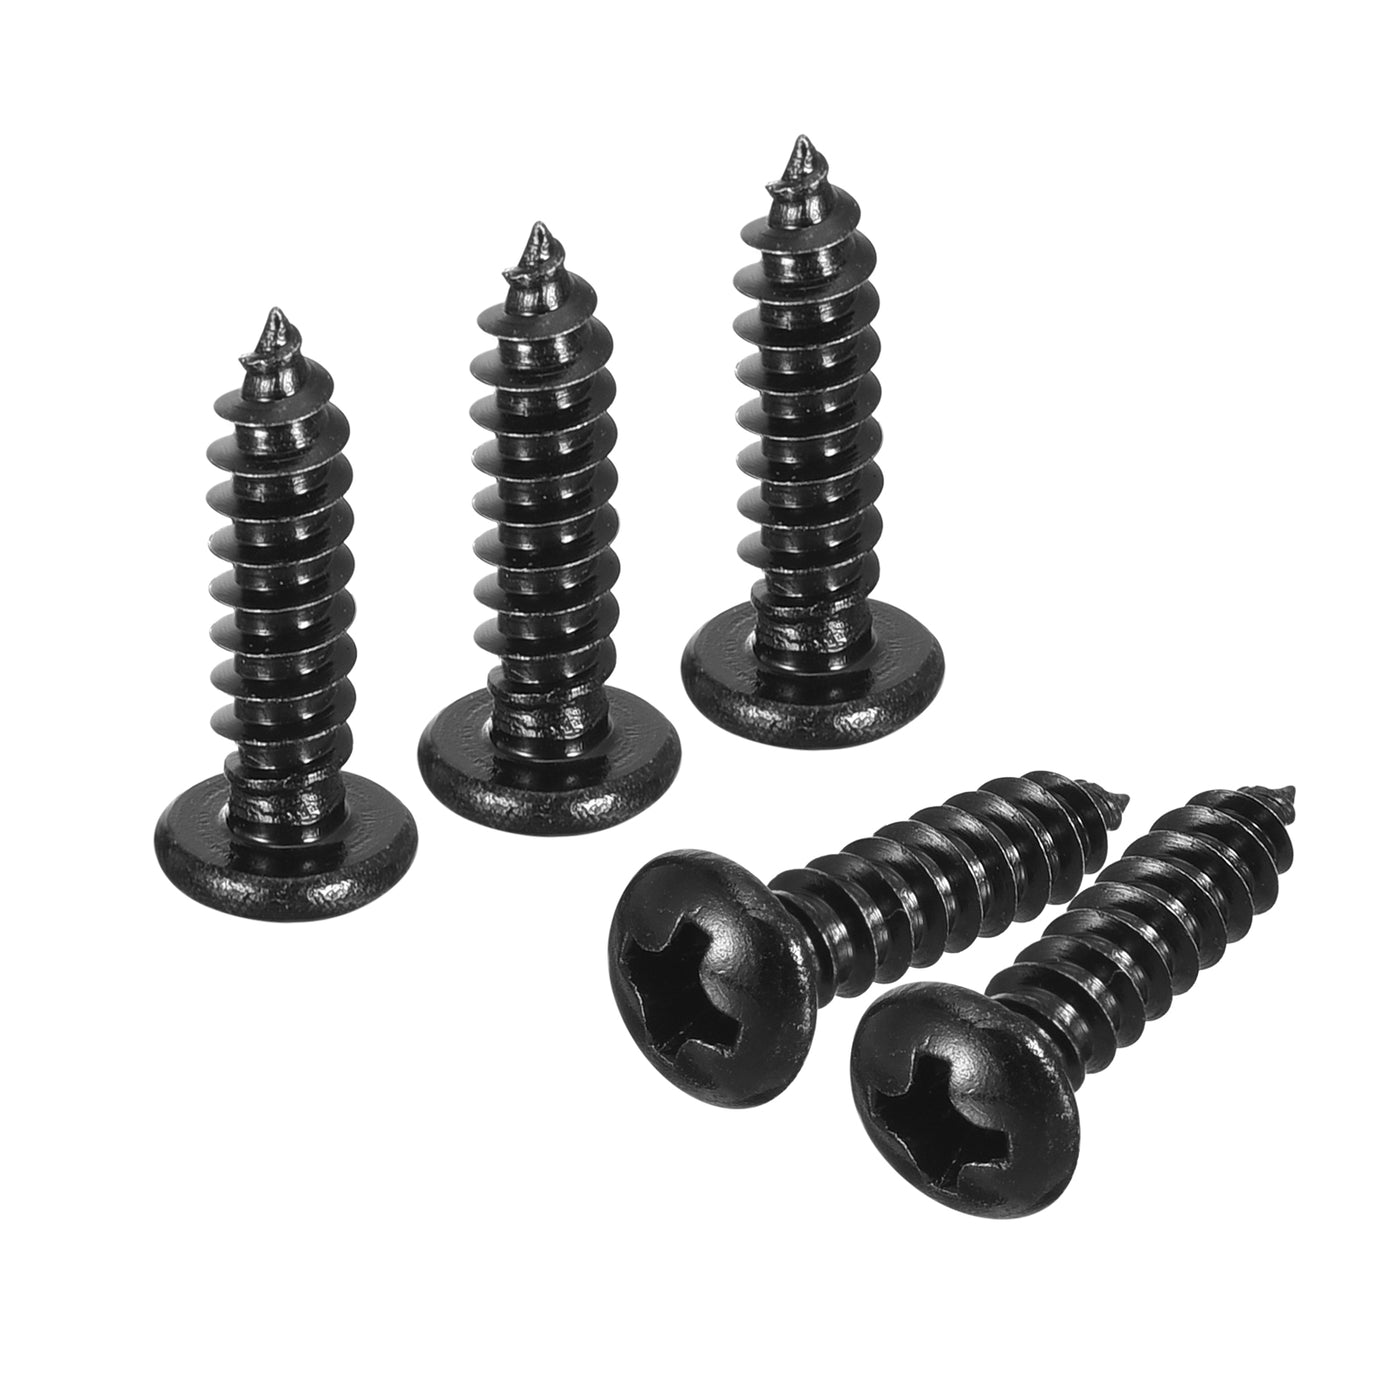 uxcell Uxcell #8 x 5/8" Phillips Pan Head Self-tapping Screw, 100pcs - 304 Stainless Steel Round Head Wood Screw Full Thread (Black)